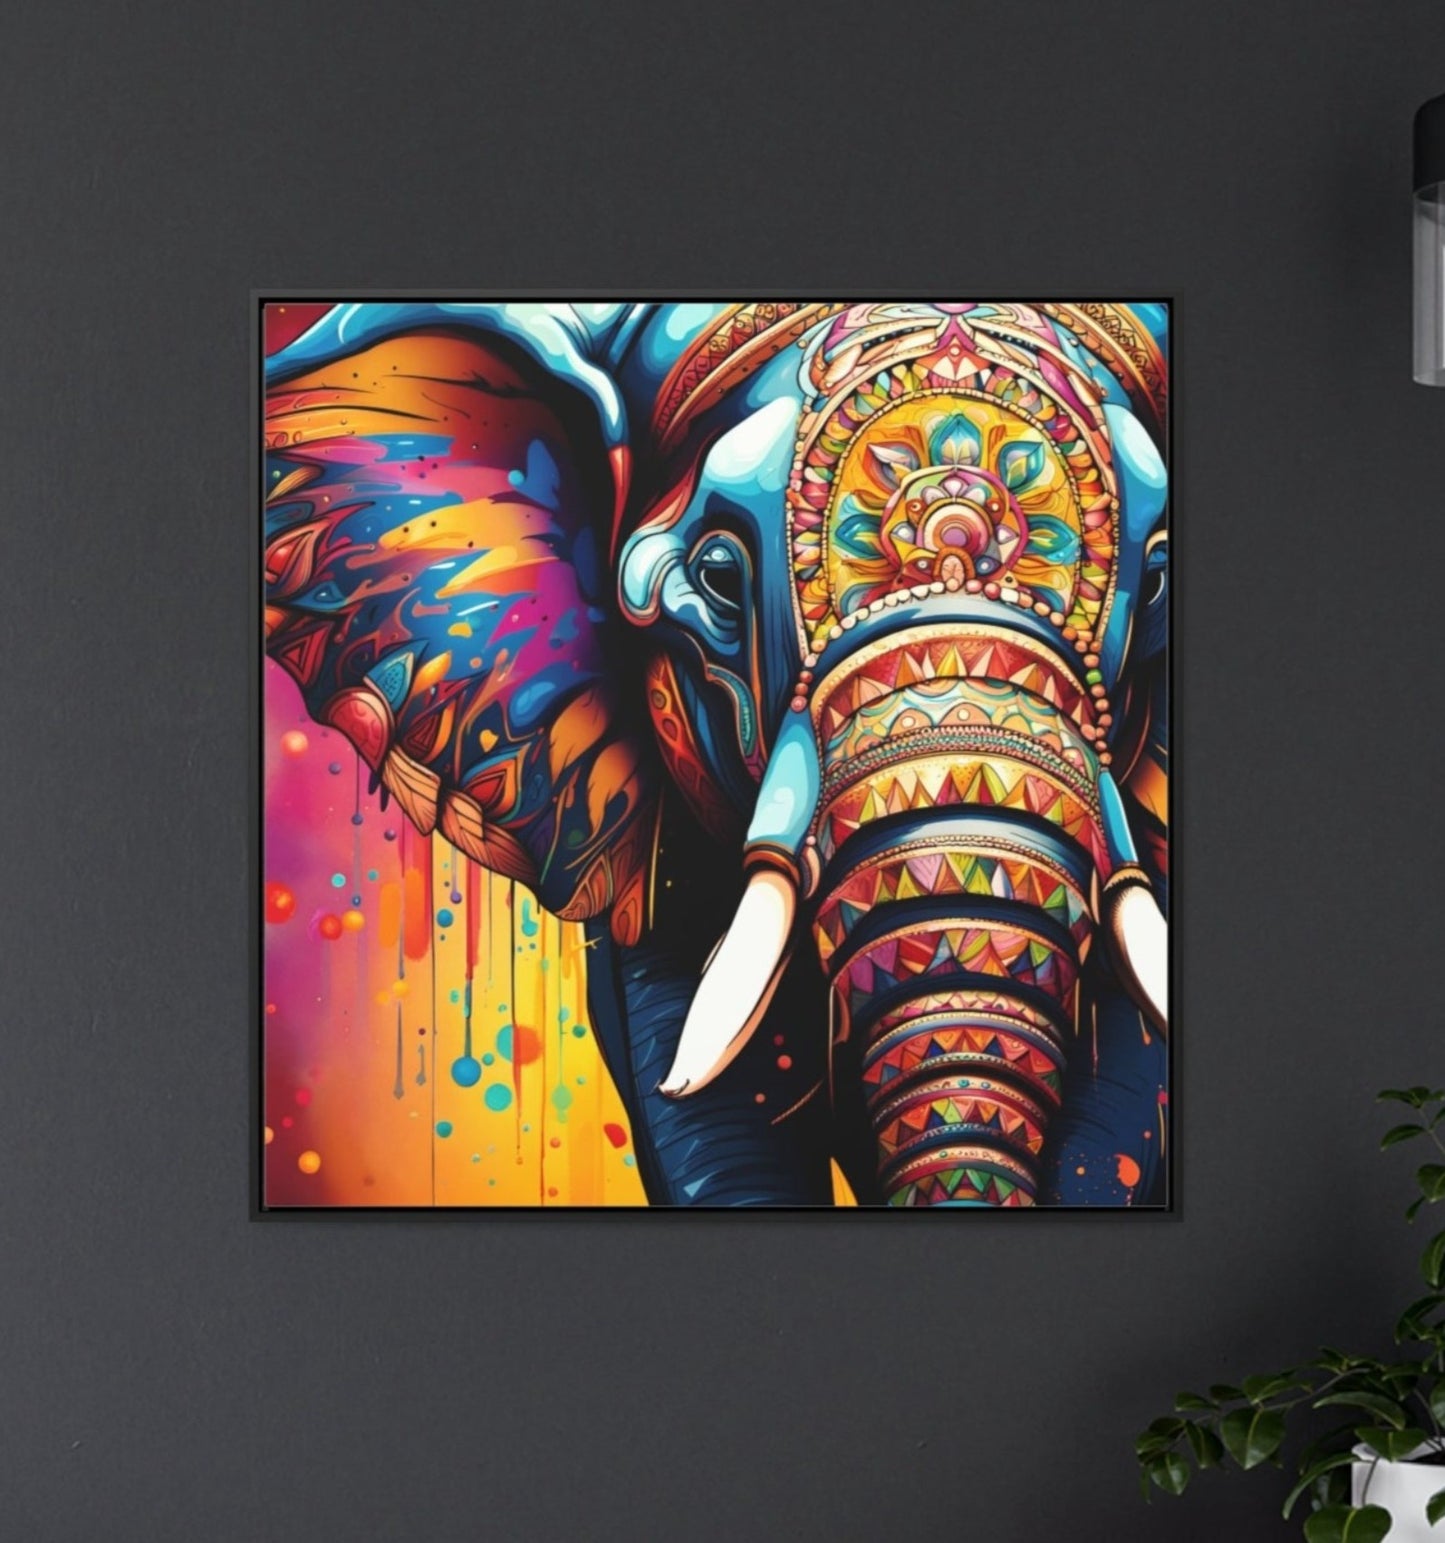 Stunning Multicolor Elephant Head Print on Canvas in a Floating Frame 36x36 hung on dark wall